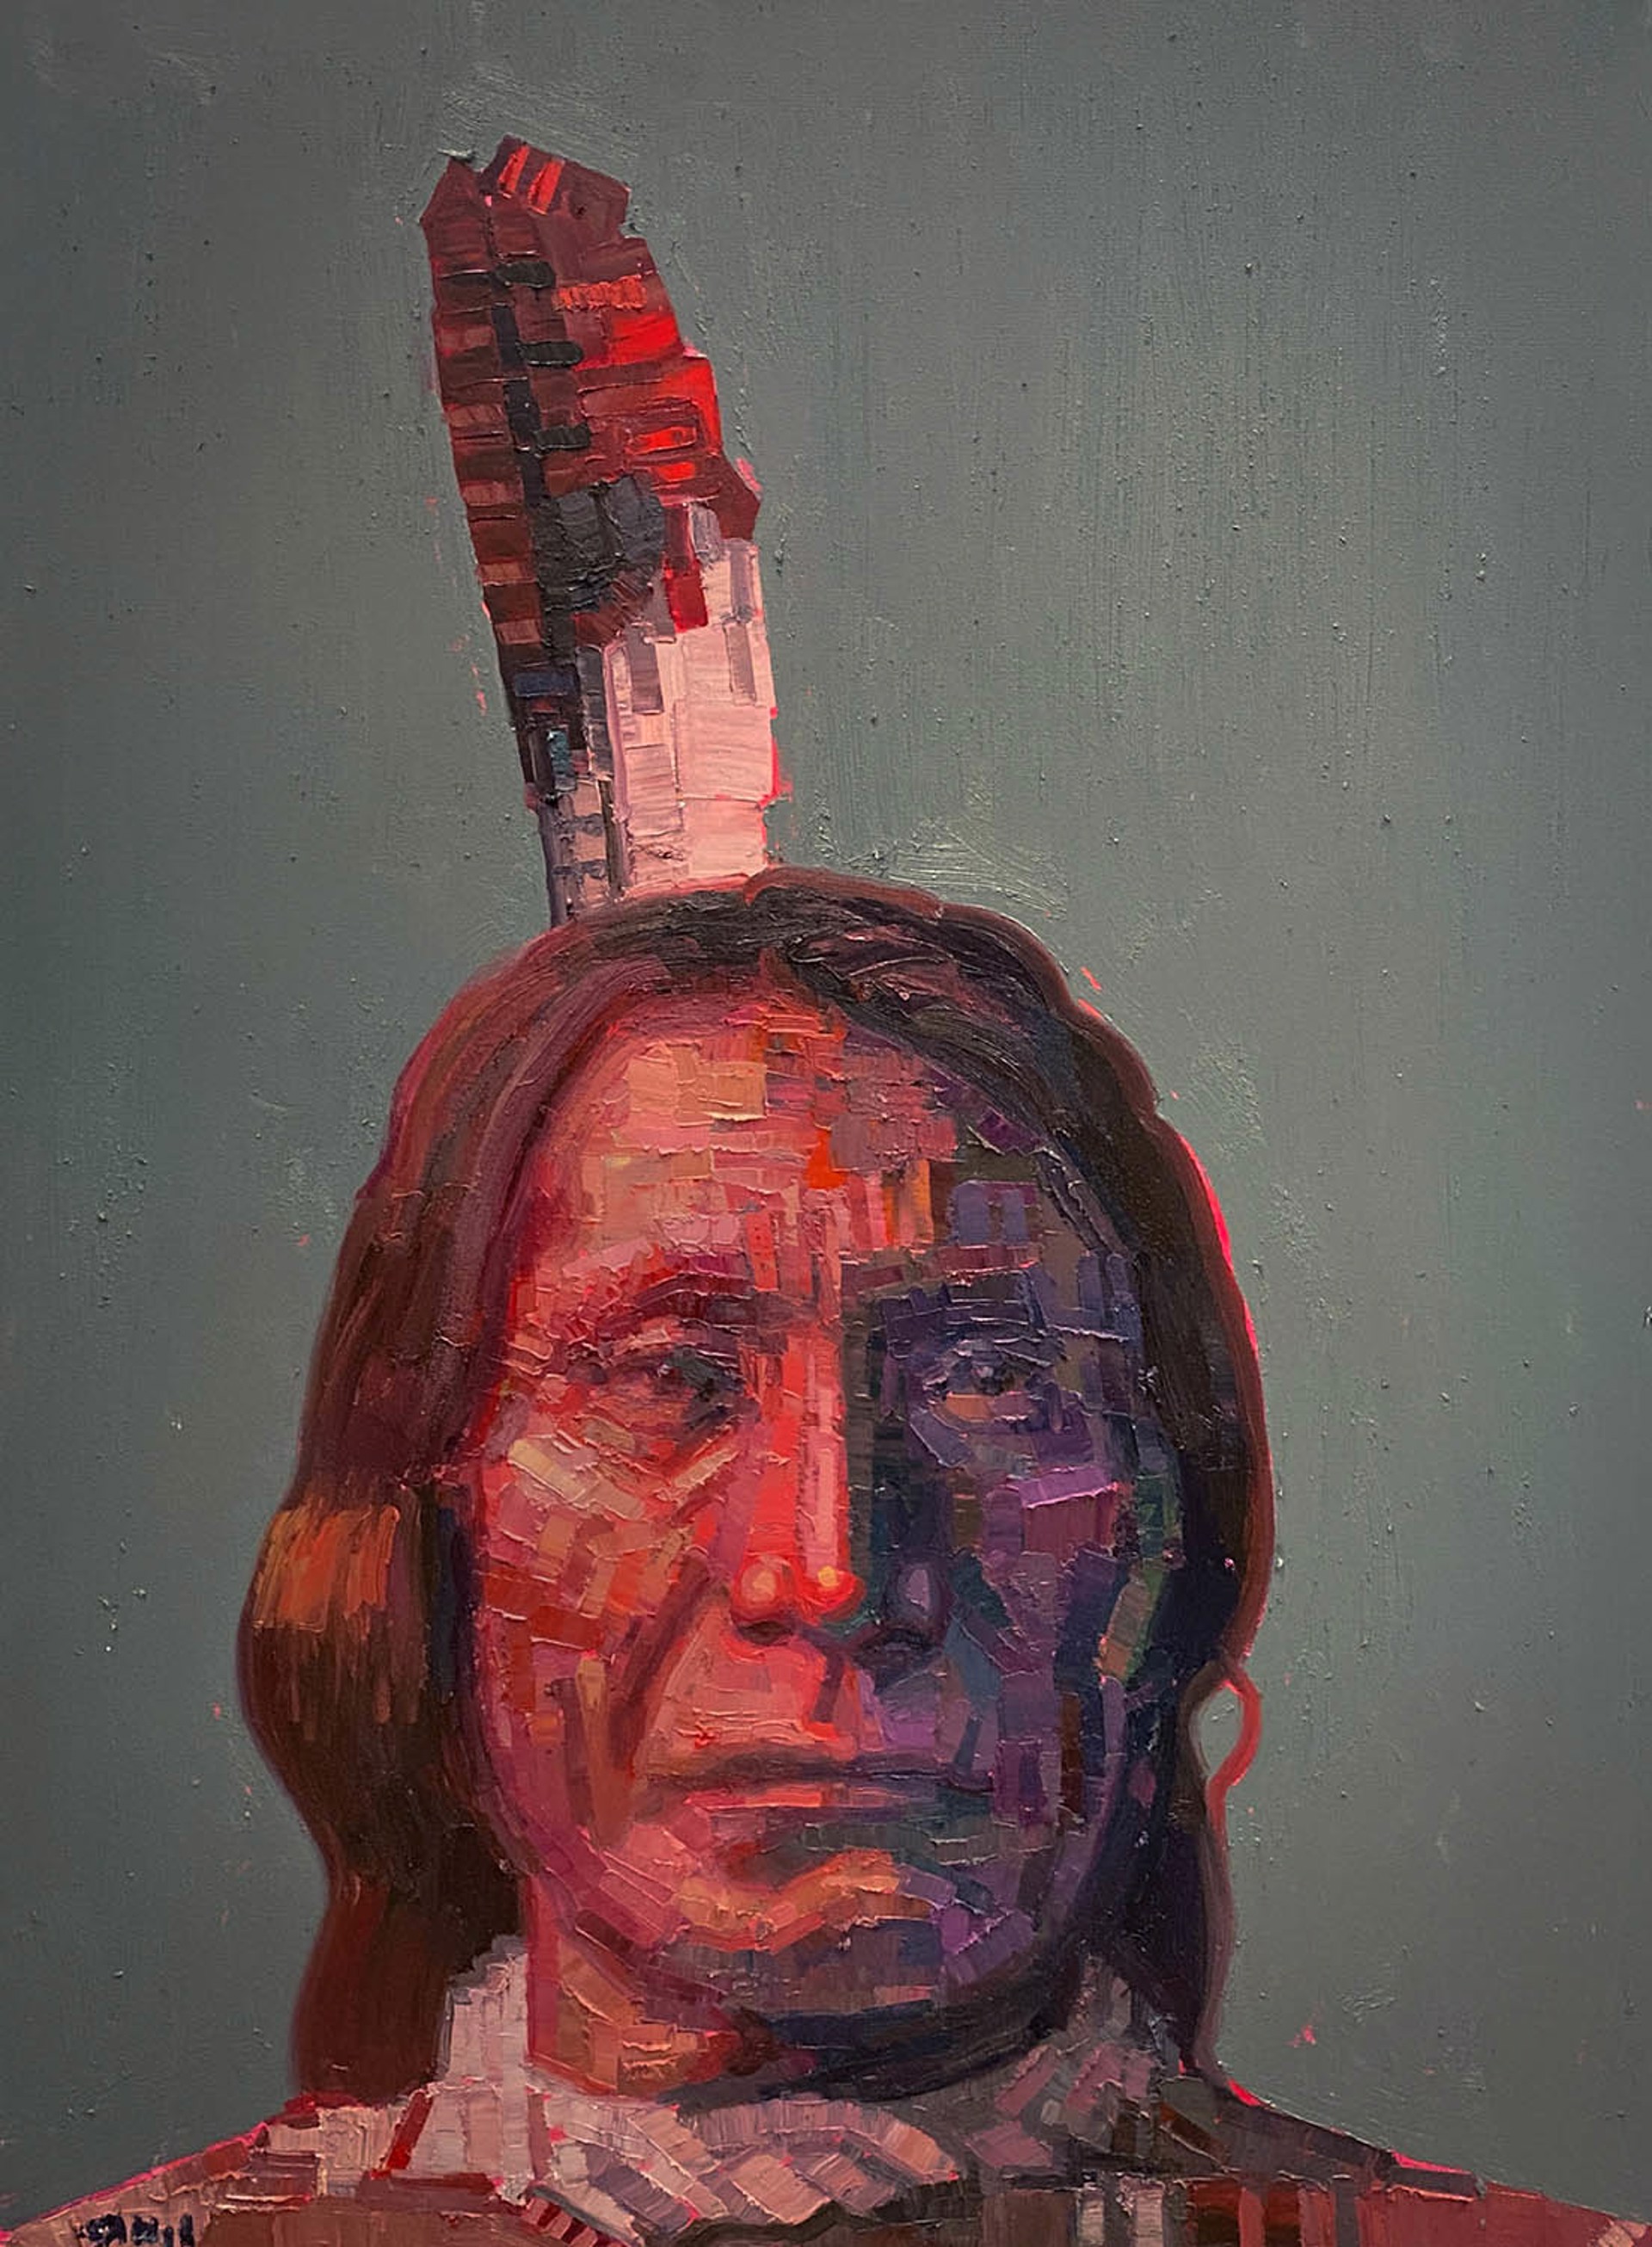 Original Oil Painting By Aaron Hazel Featuring A Native Portrait Over Teal Background